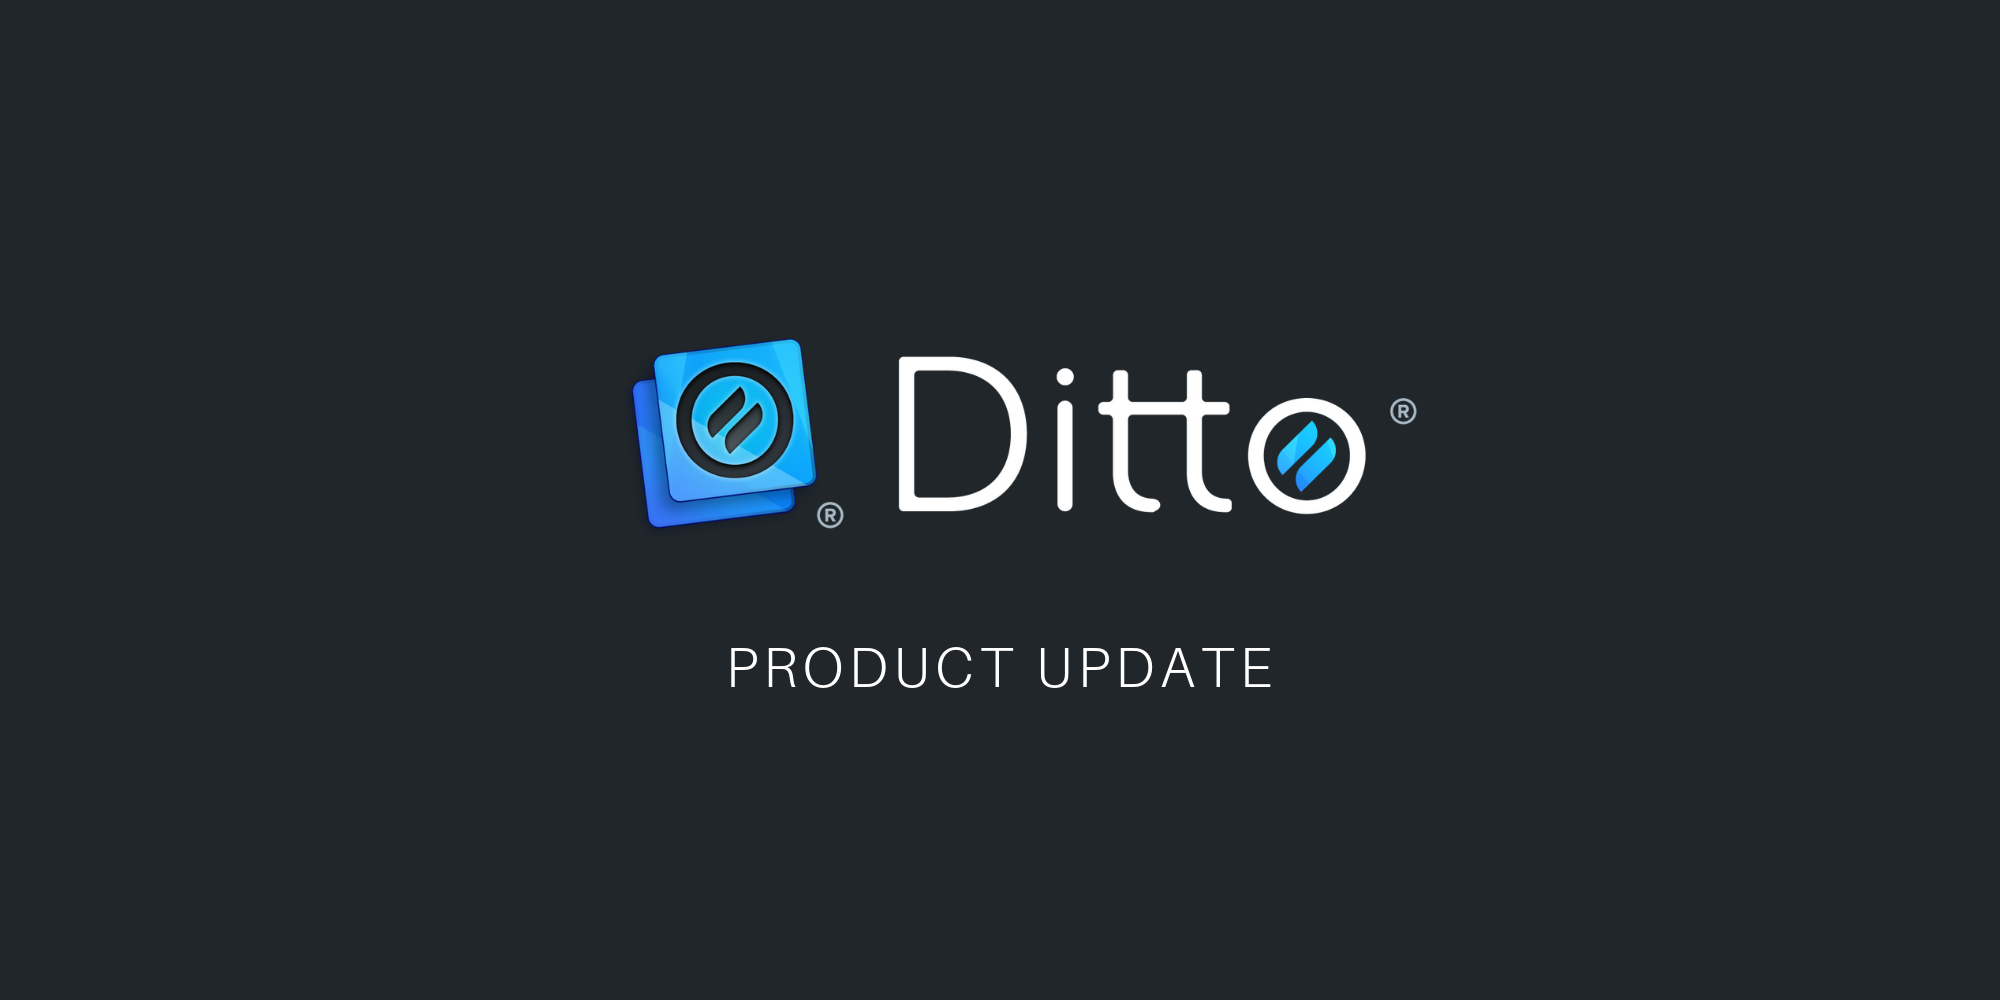 Ditto Product Update